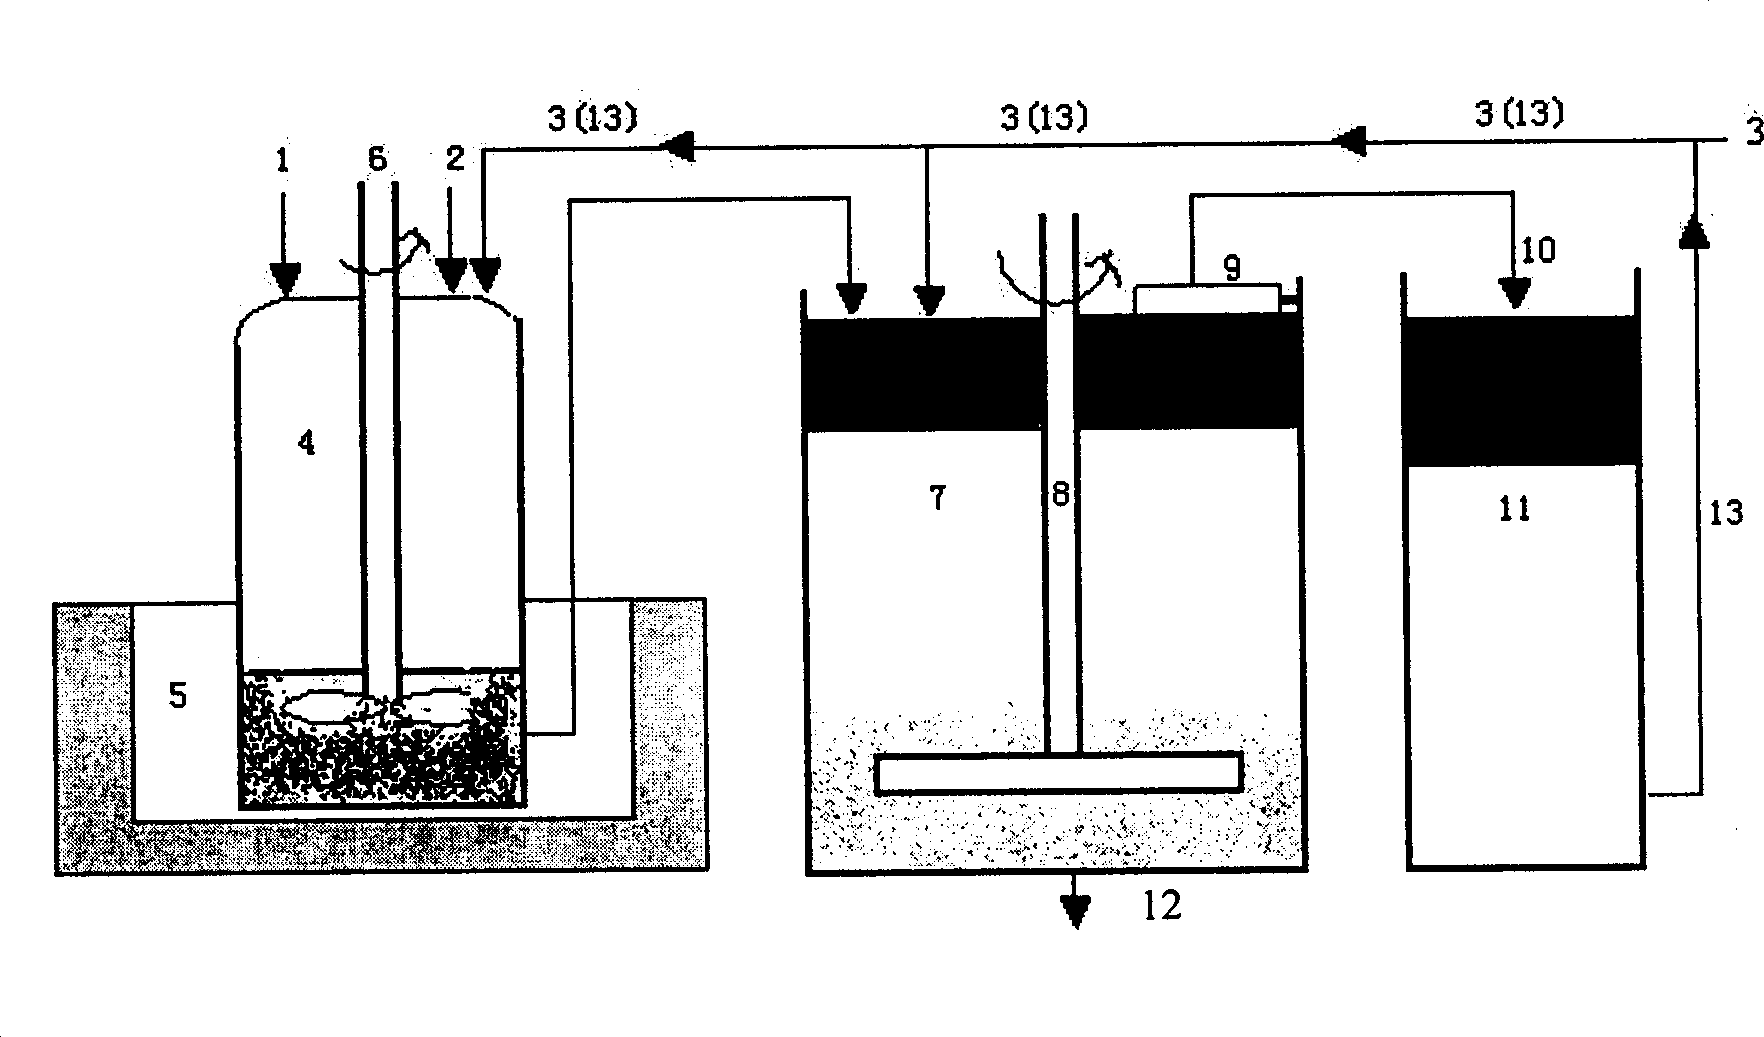 Method for treating carbonate sands polluted by overflowed oil at coastal beach